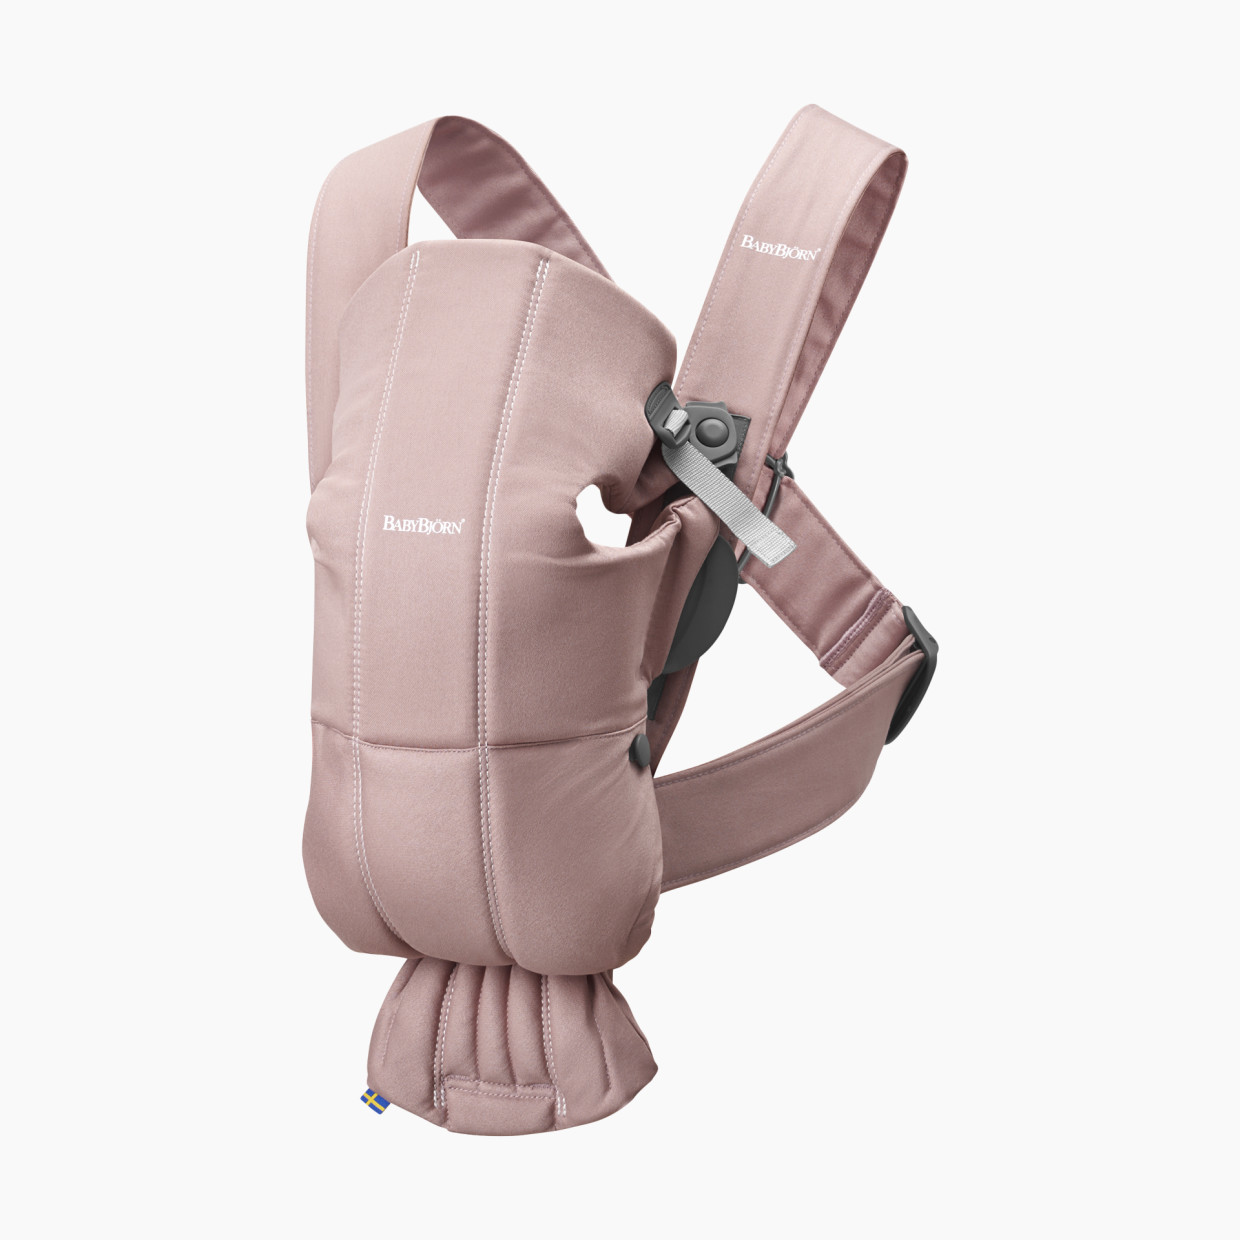 Baby Bjorn Baby Carrier Mini - Dusty Pink Cotton (2018).